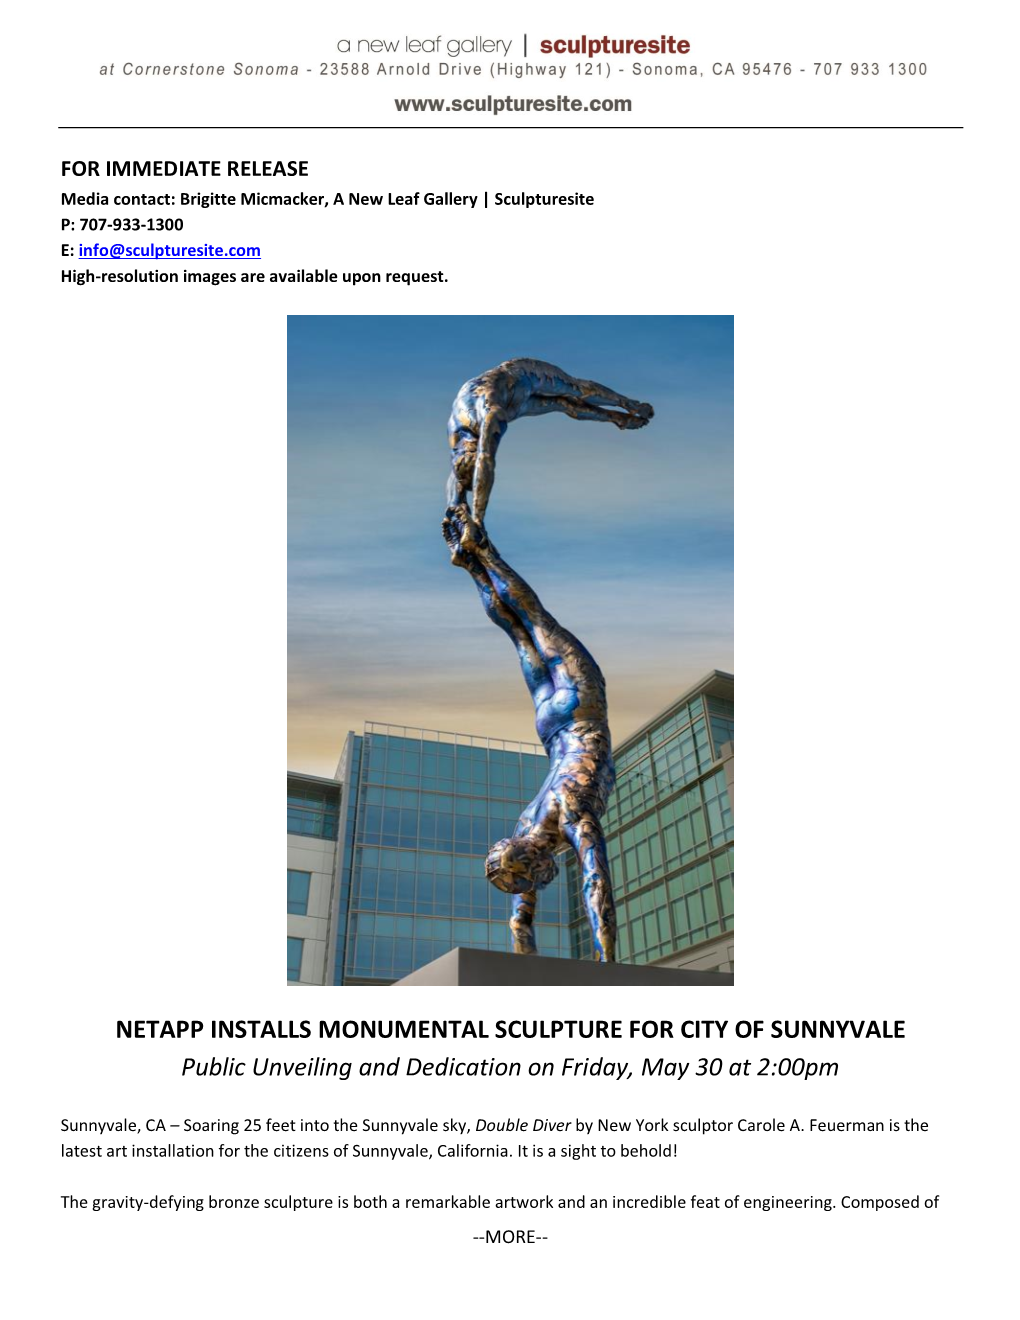 NETAPP INSTALLS MONUMENTAL SCULPTURE for CITY of SUNNYVALE Public Unveiling and Dedication on Friday, May 30 at 2:00Pm